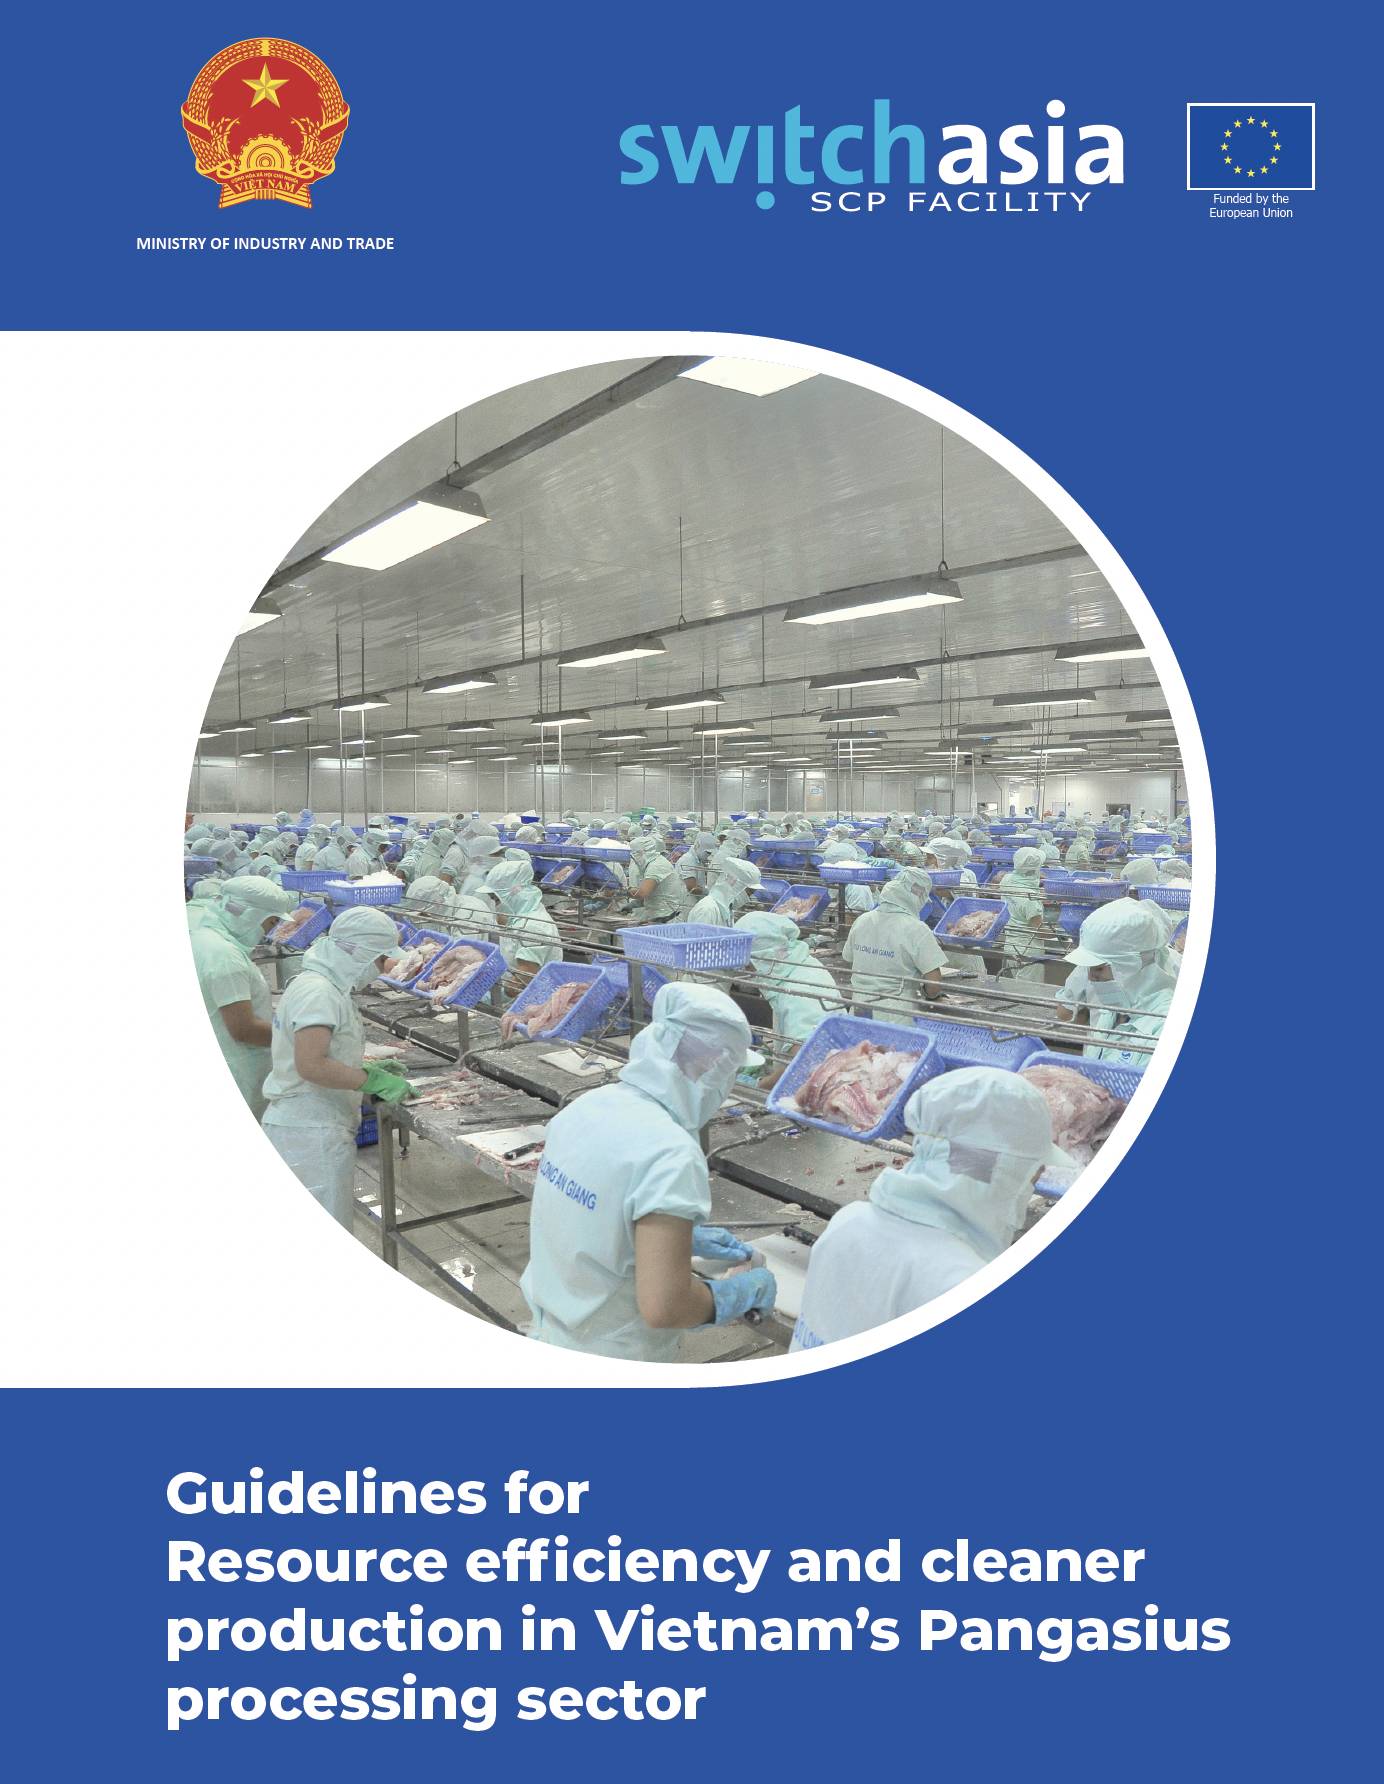 Guidelines for resource efficiency and cleaner production in Vietnam's Pangasius processing sector